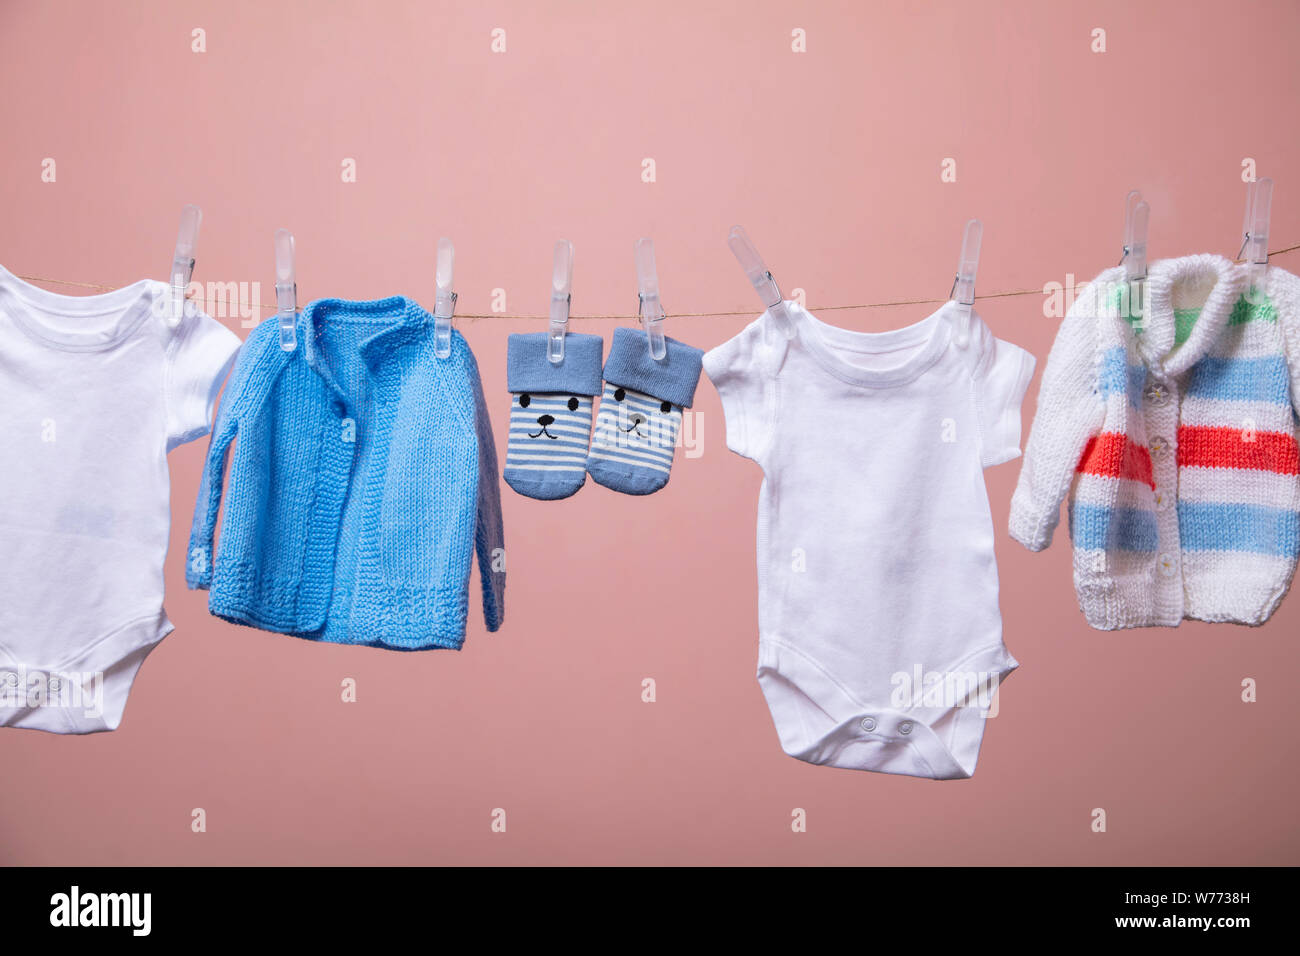 New born baby grows, jumpers, socks hanging on a clothes line against pink Stock Photo